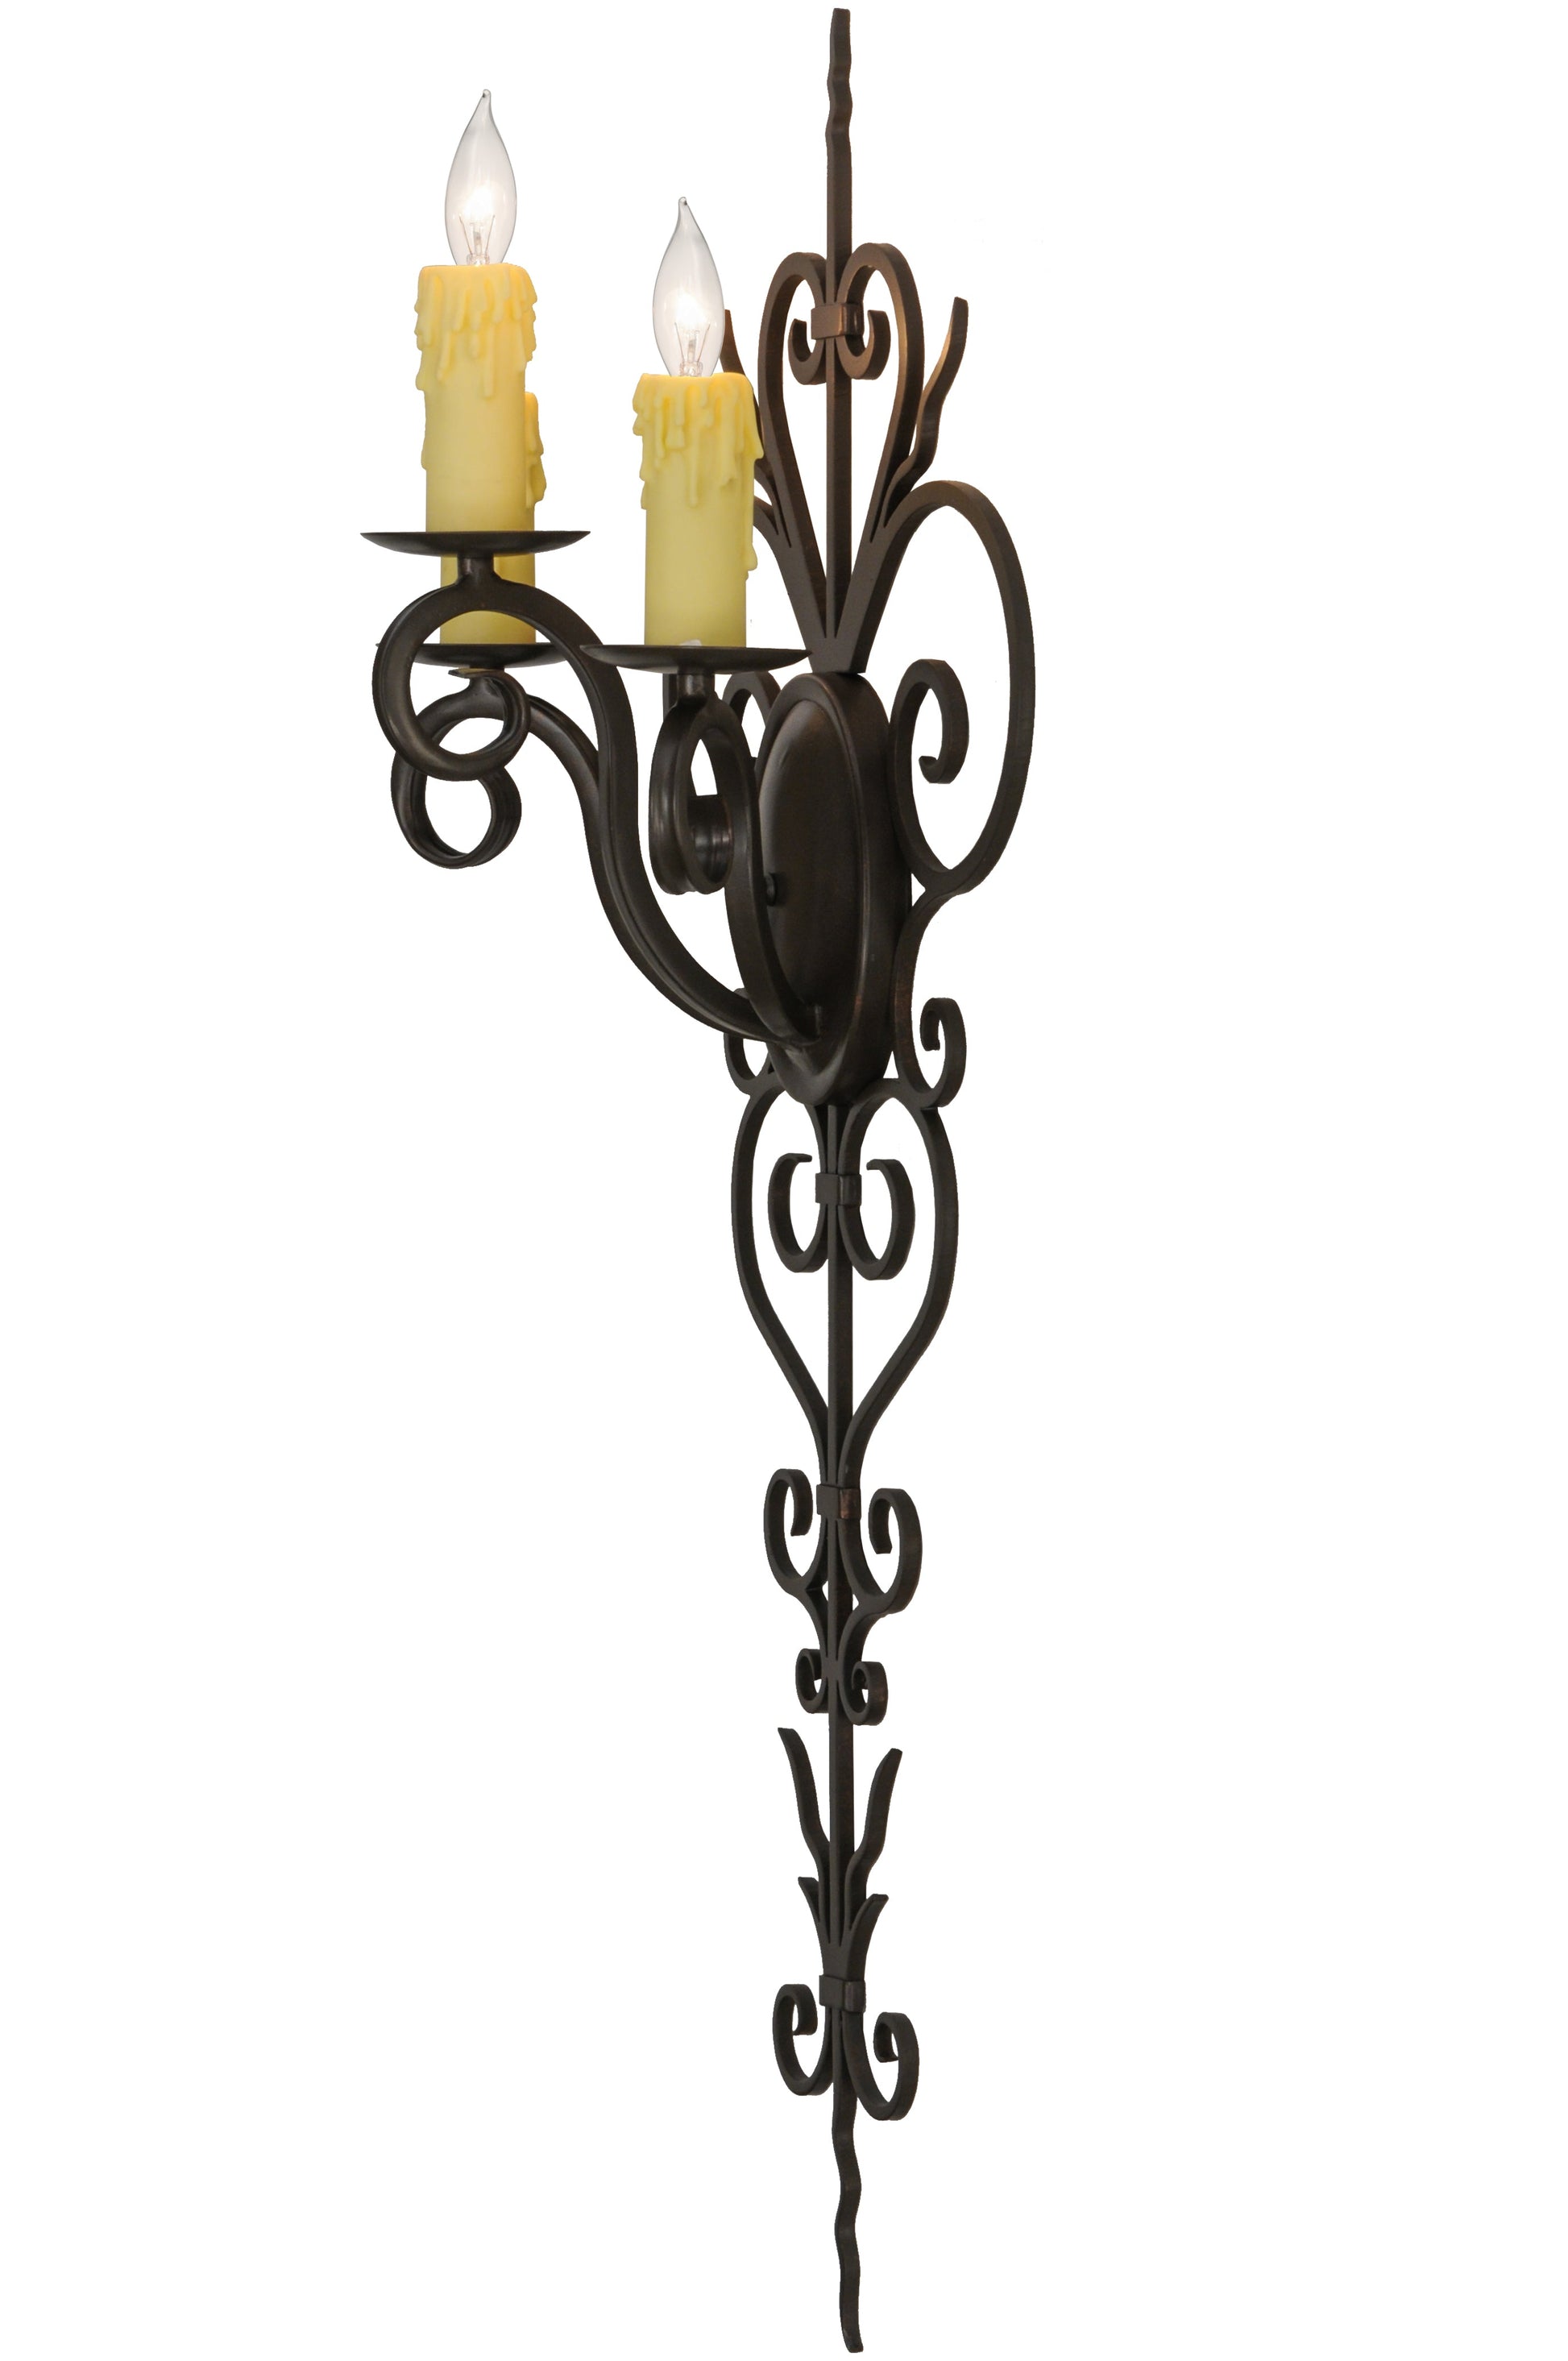 14" Kenna 3-Light Wall Sconce by 2nd Ave Lighting